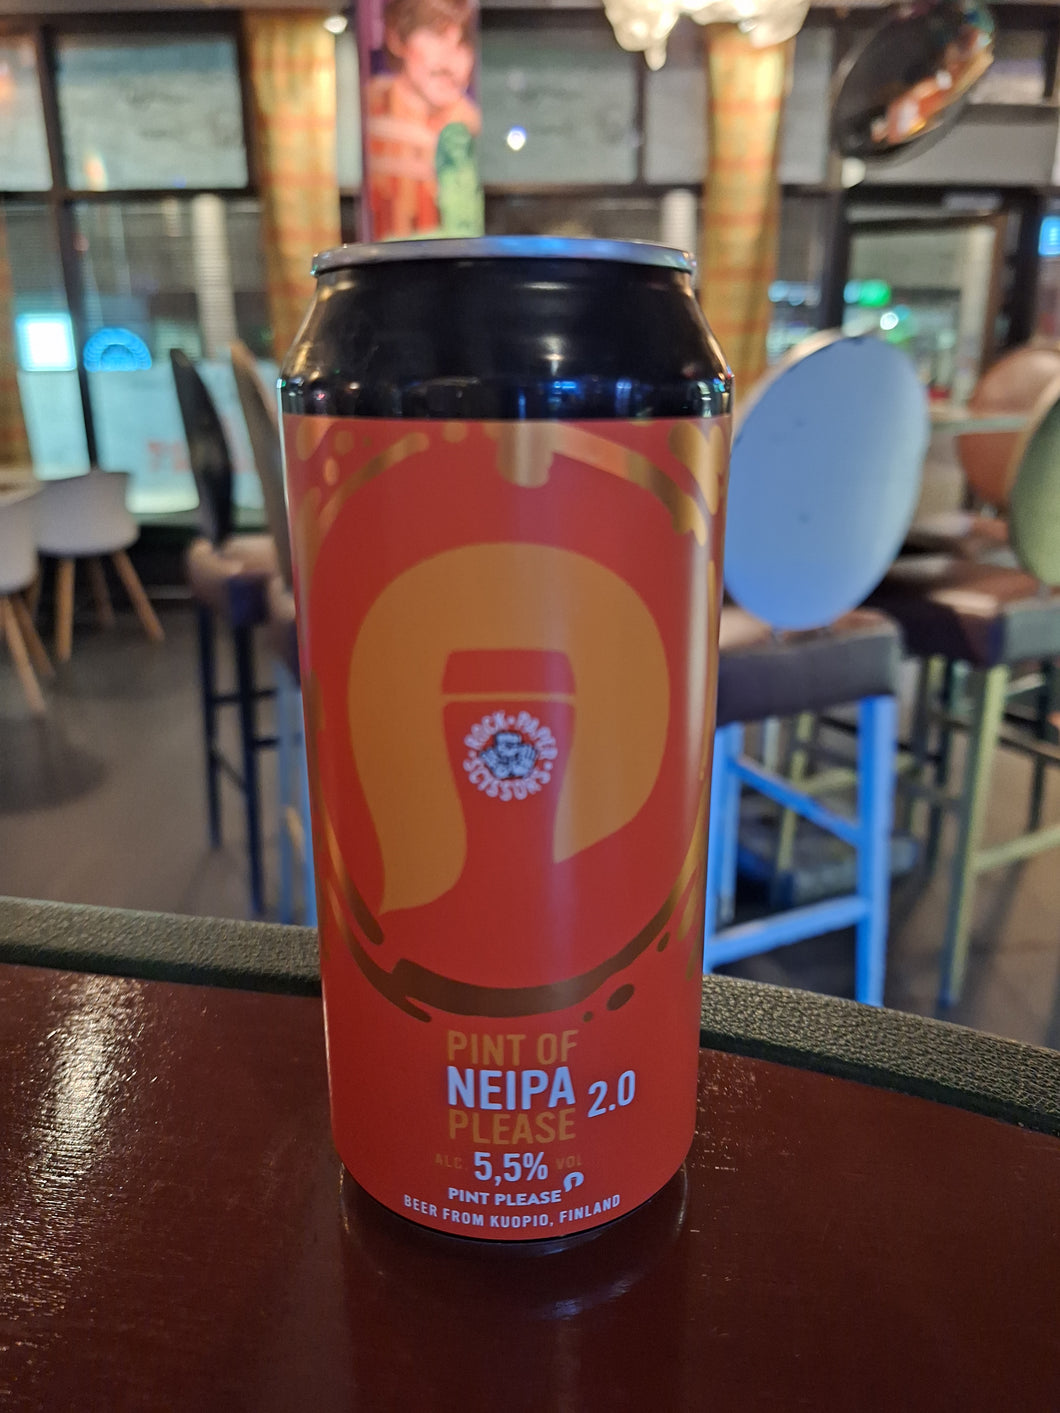 RPS Brewing Pint of NEIPA Please 2.0